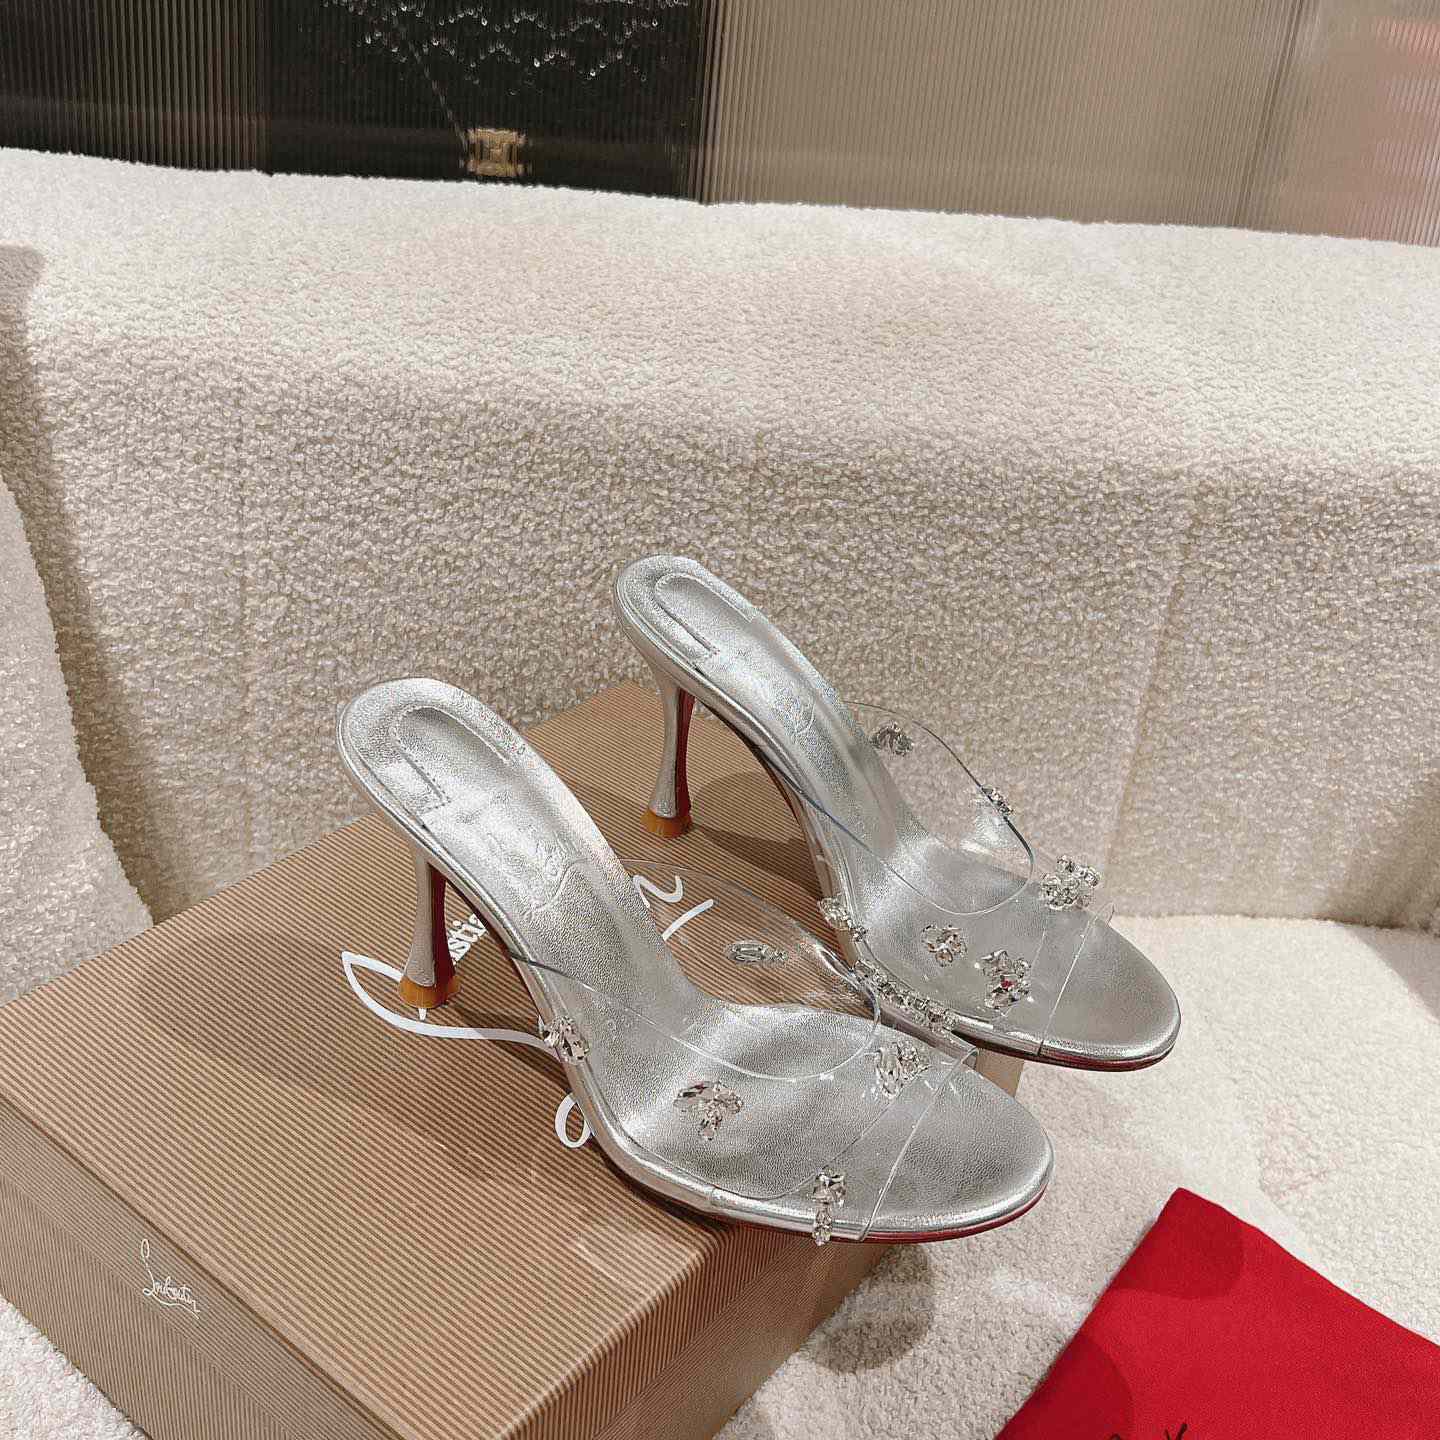 Christian Louboutin Degraqueen 85mm Crystal-embellished Mules - everydesigner